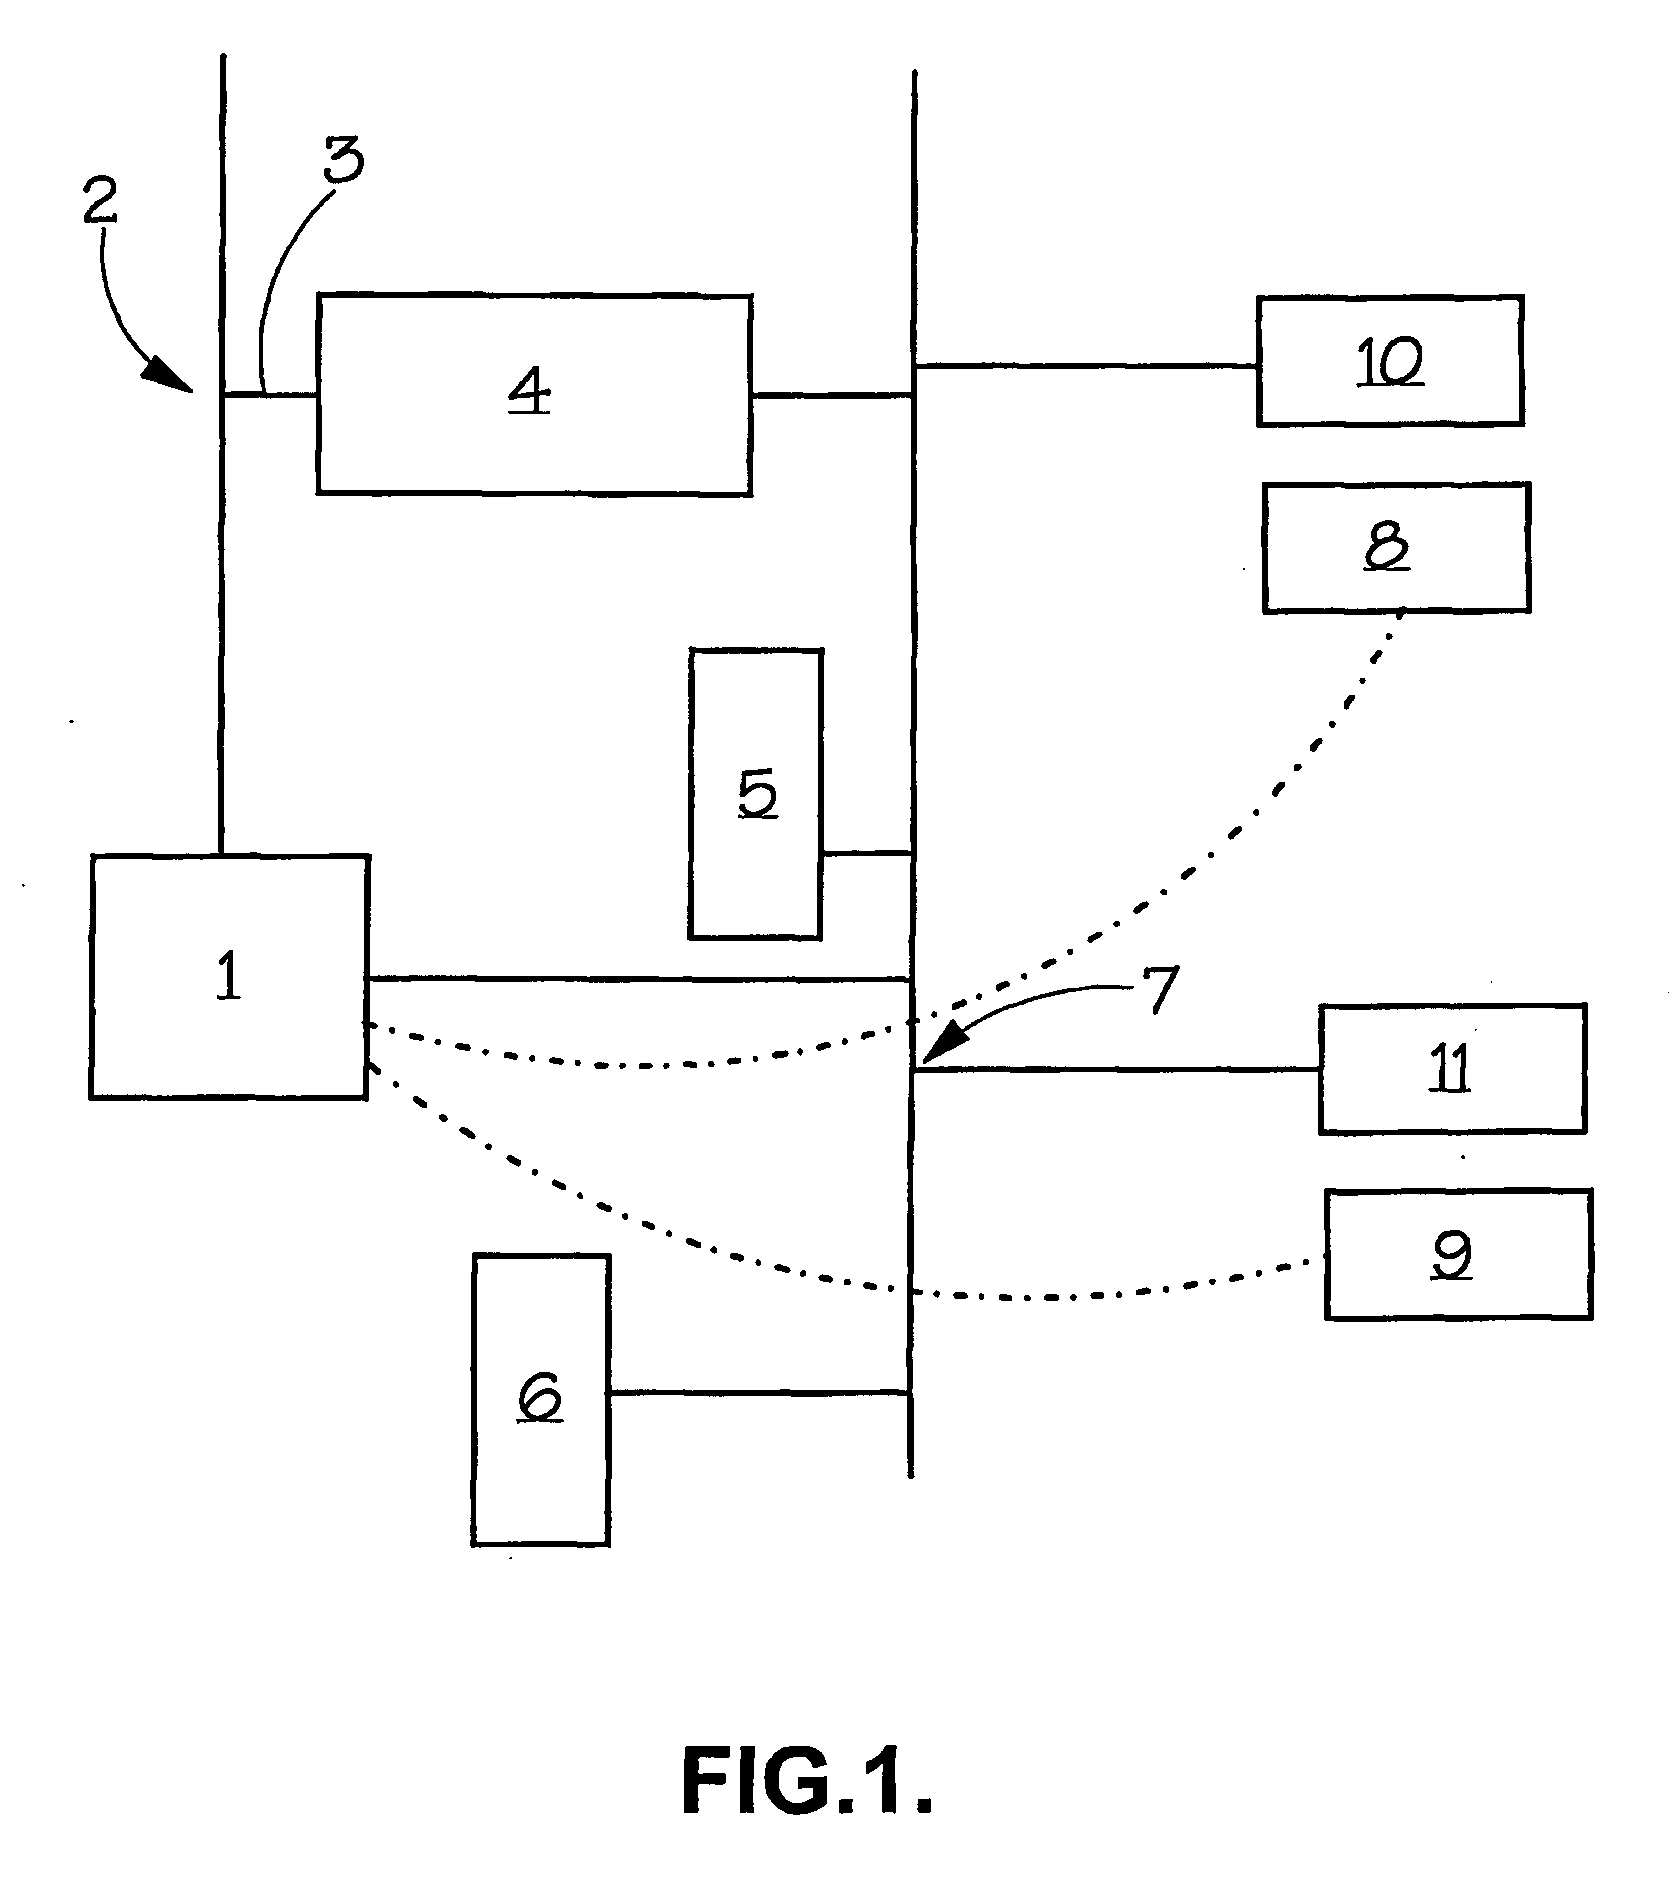 System and Method for Analysing Communication Streams